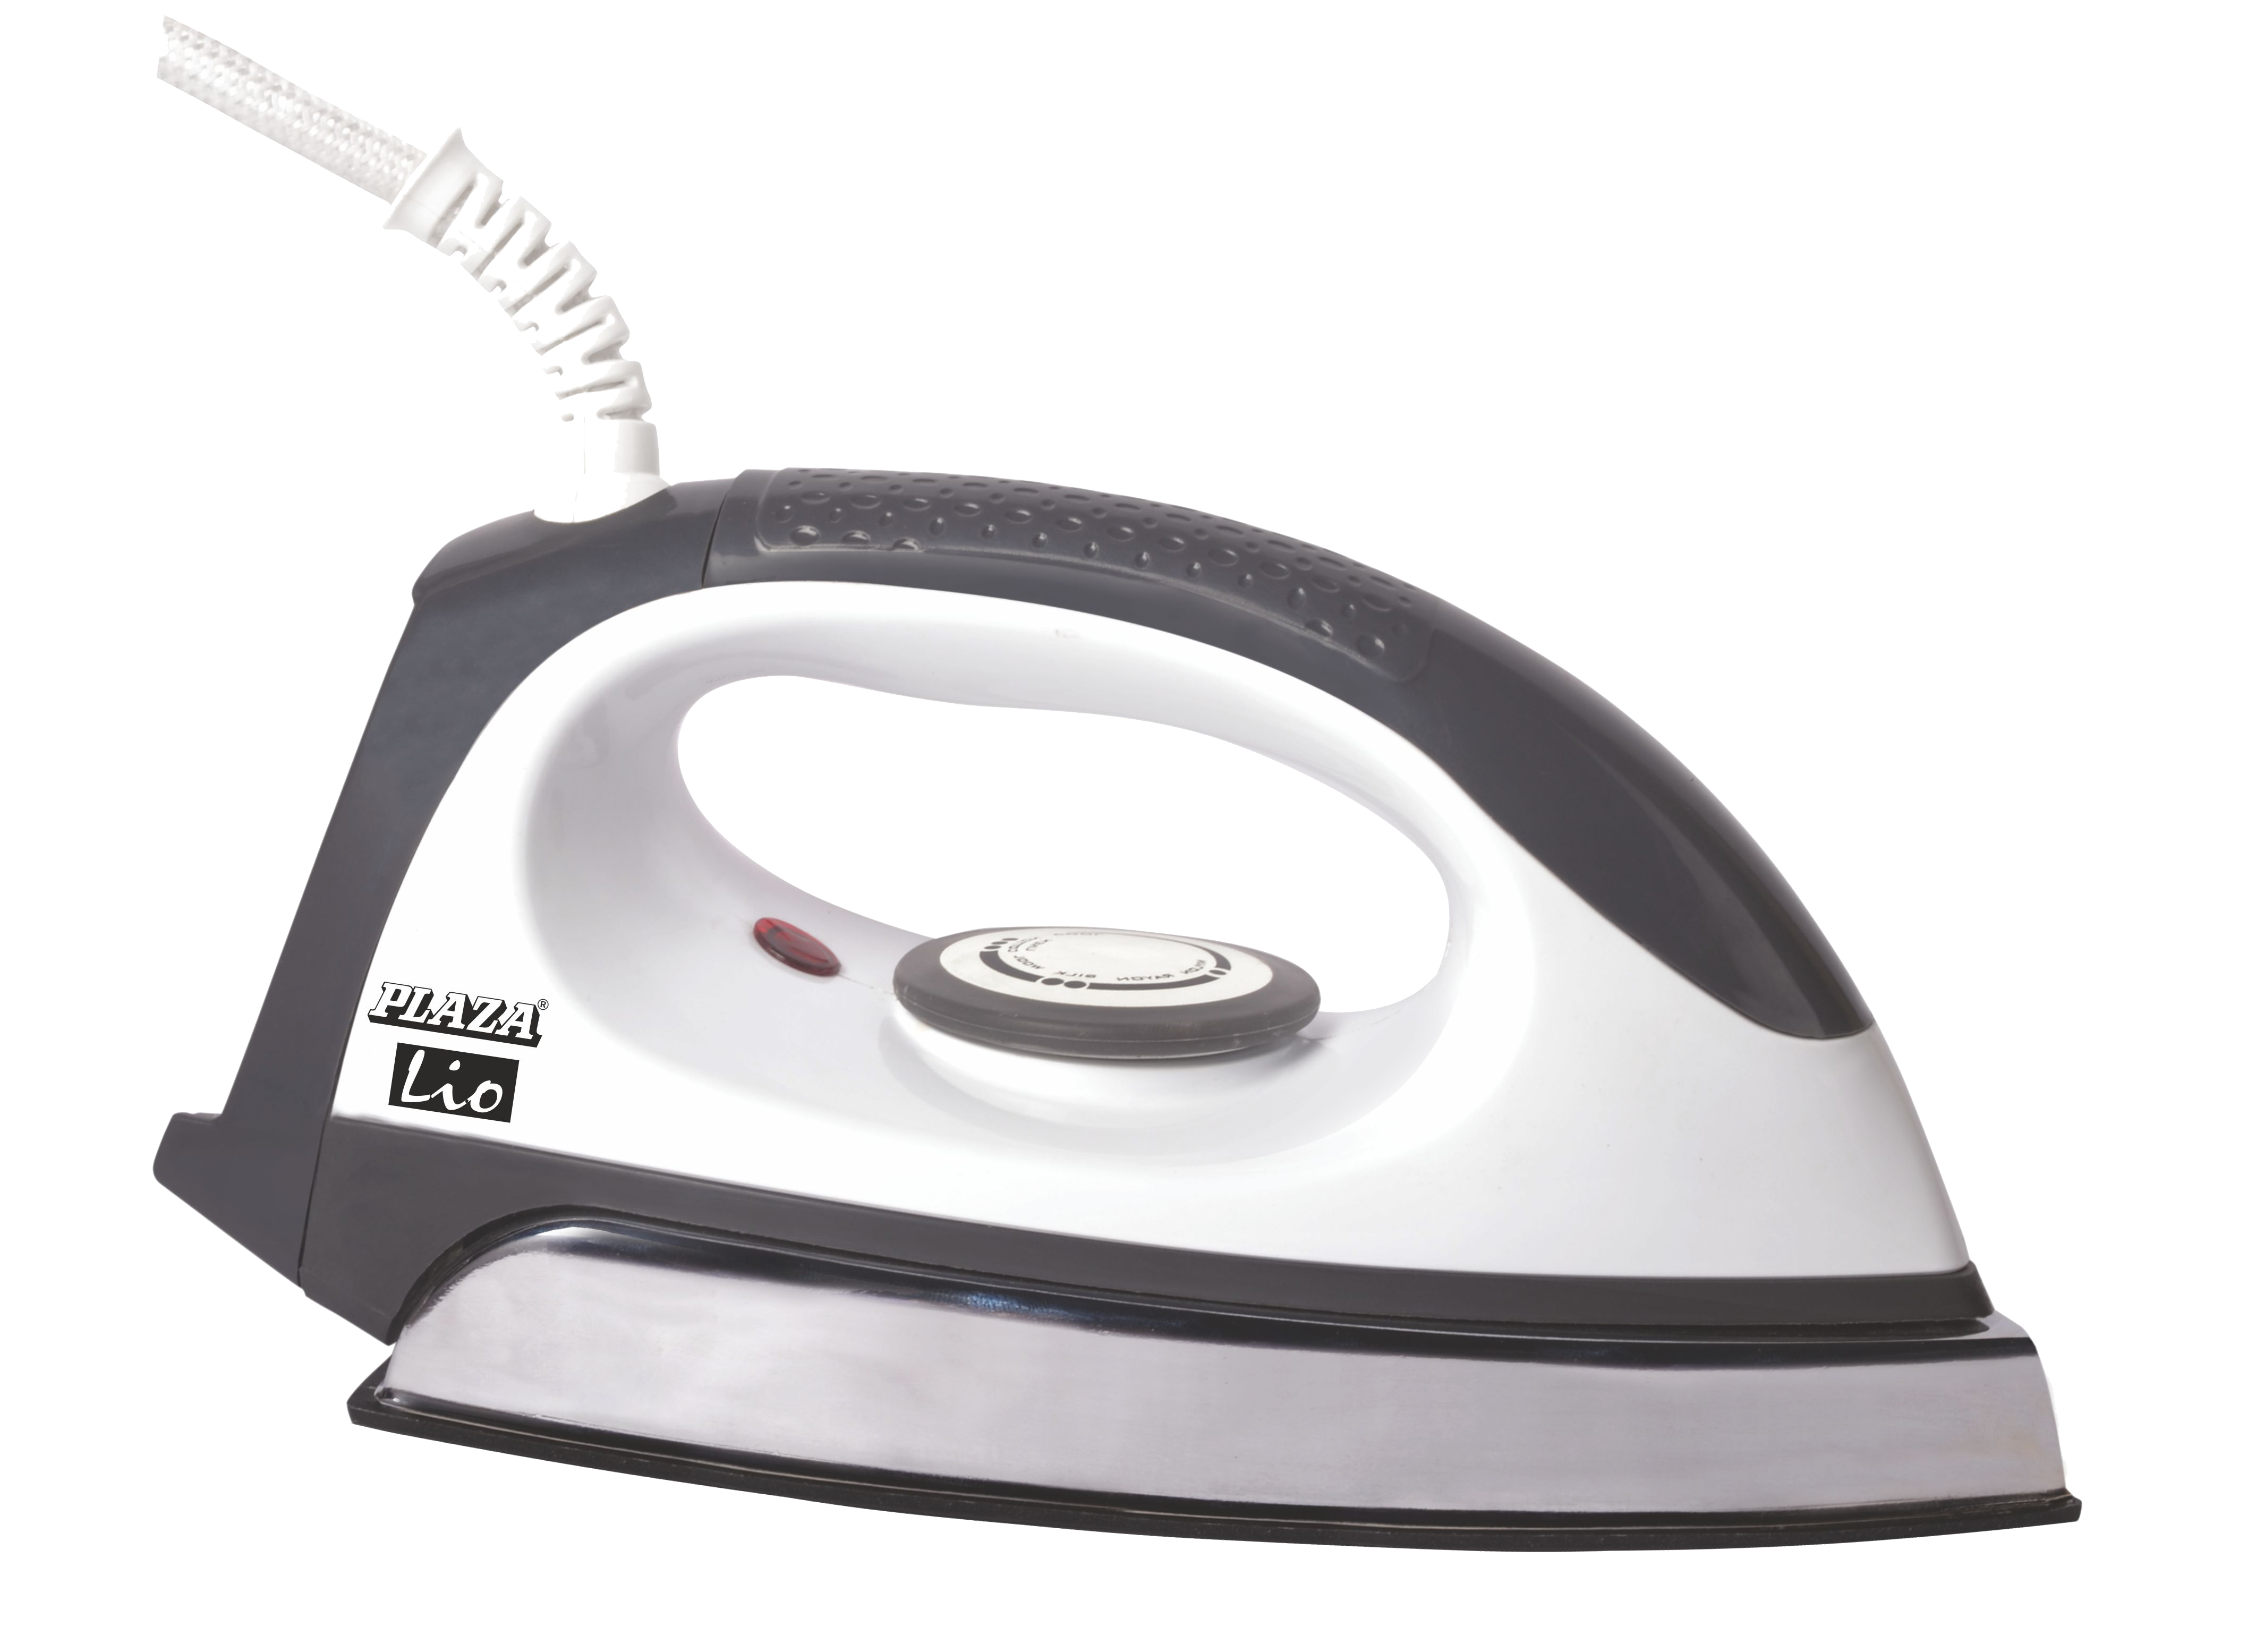 Electric Iron PNG Free Download